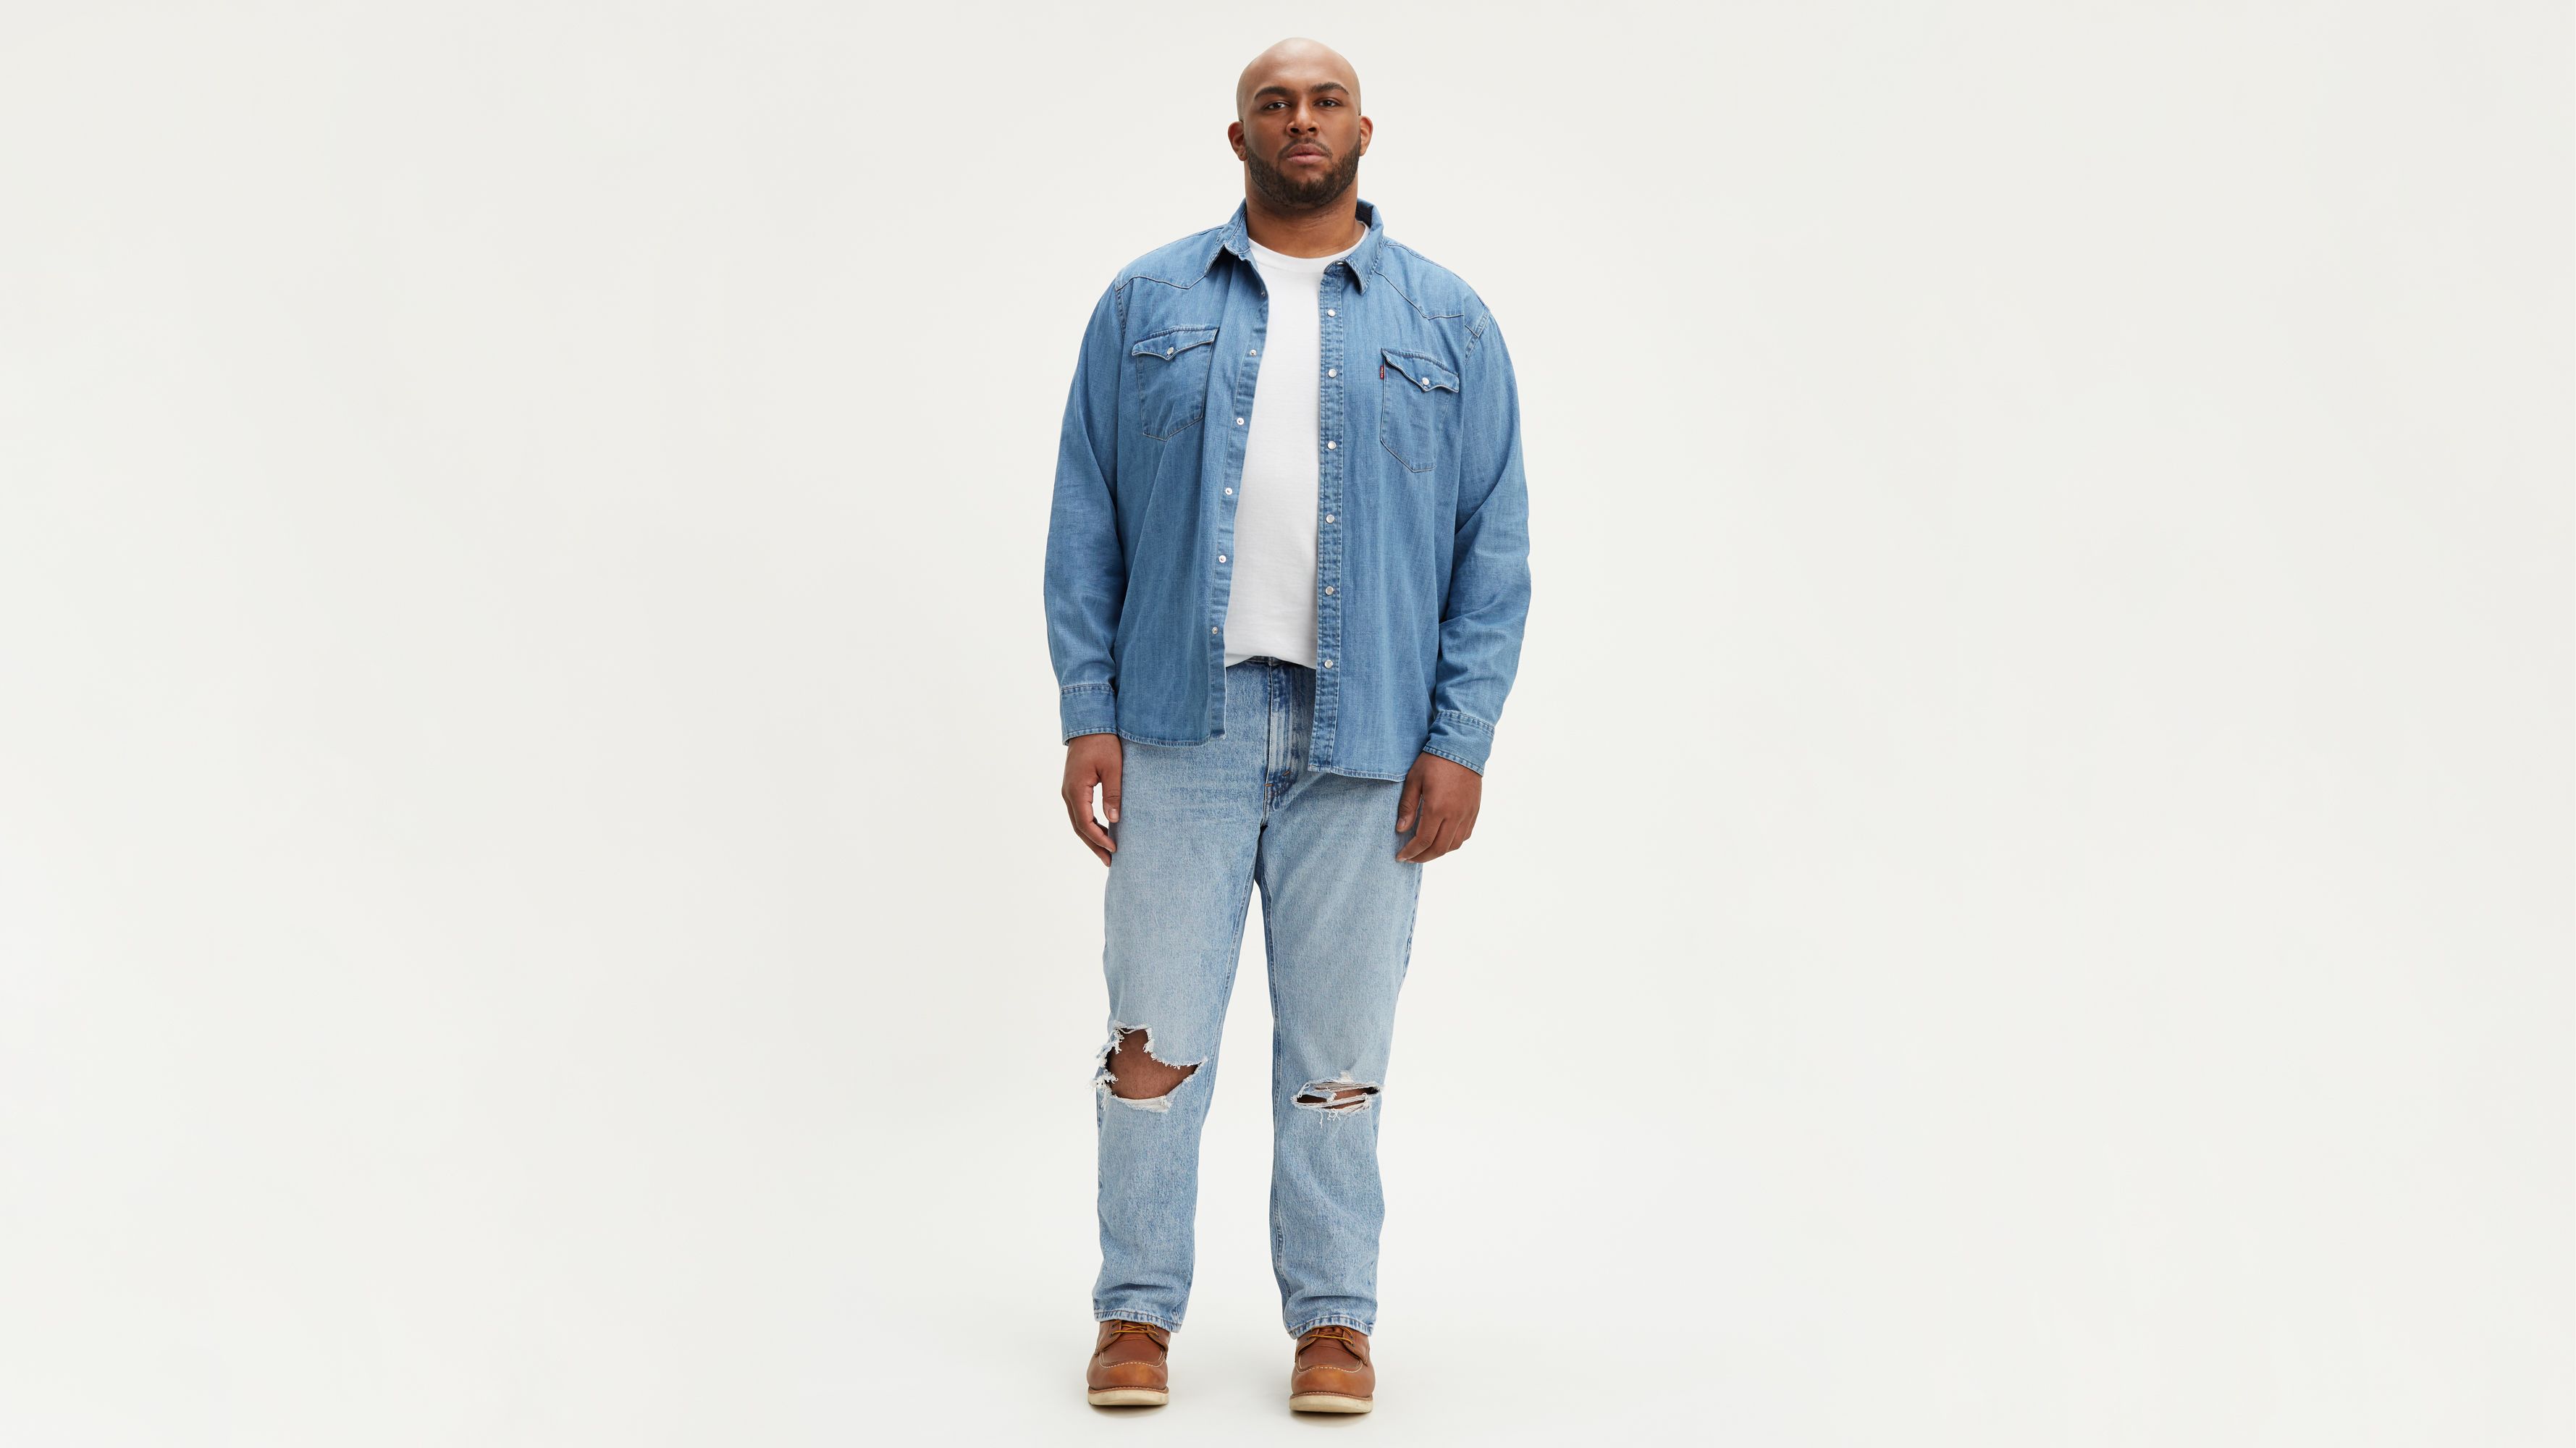 levi's 541 big and tall jeans